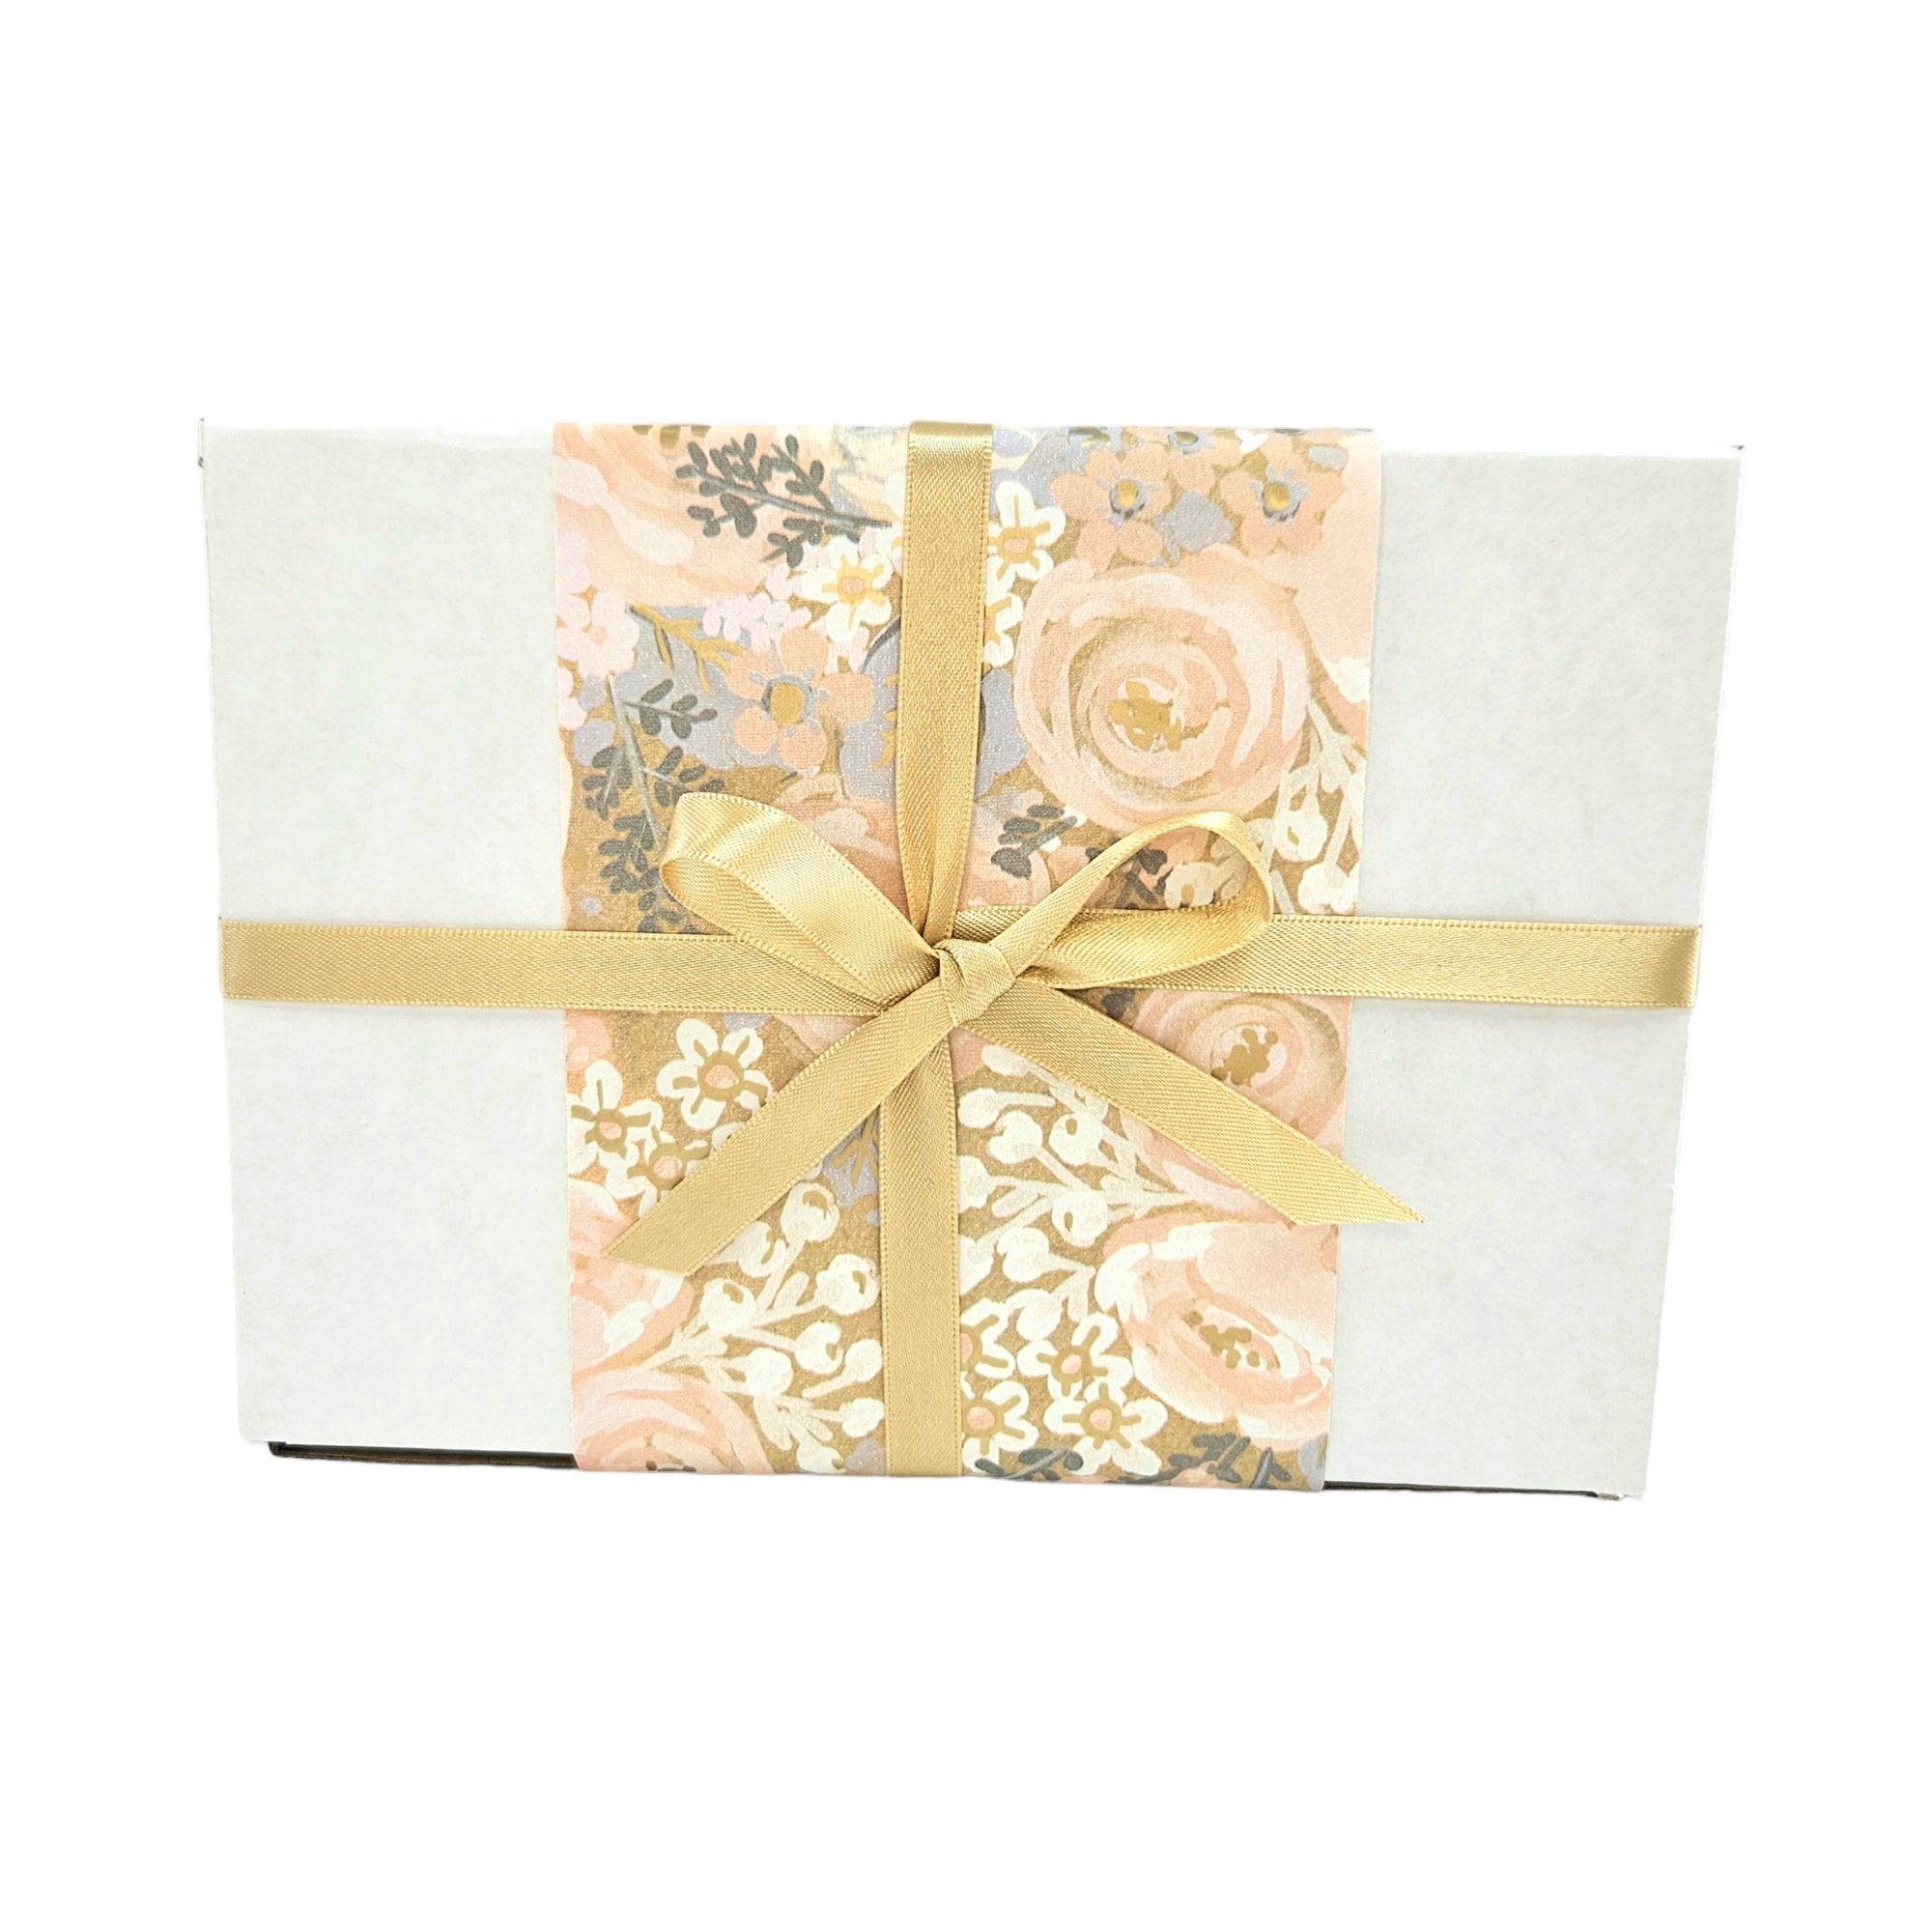 Caramel Cutie (Free delivery) - Beautiful Gifts